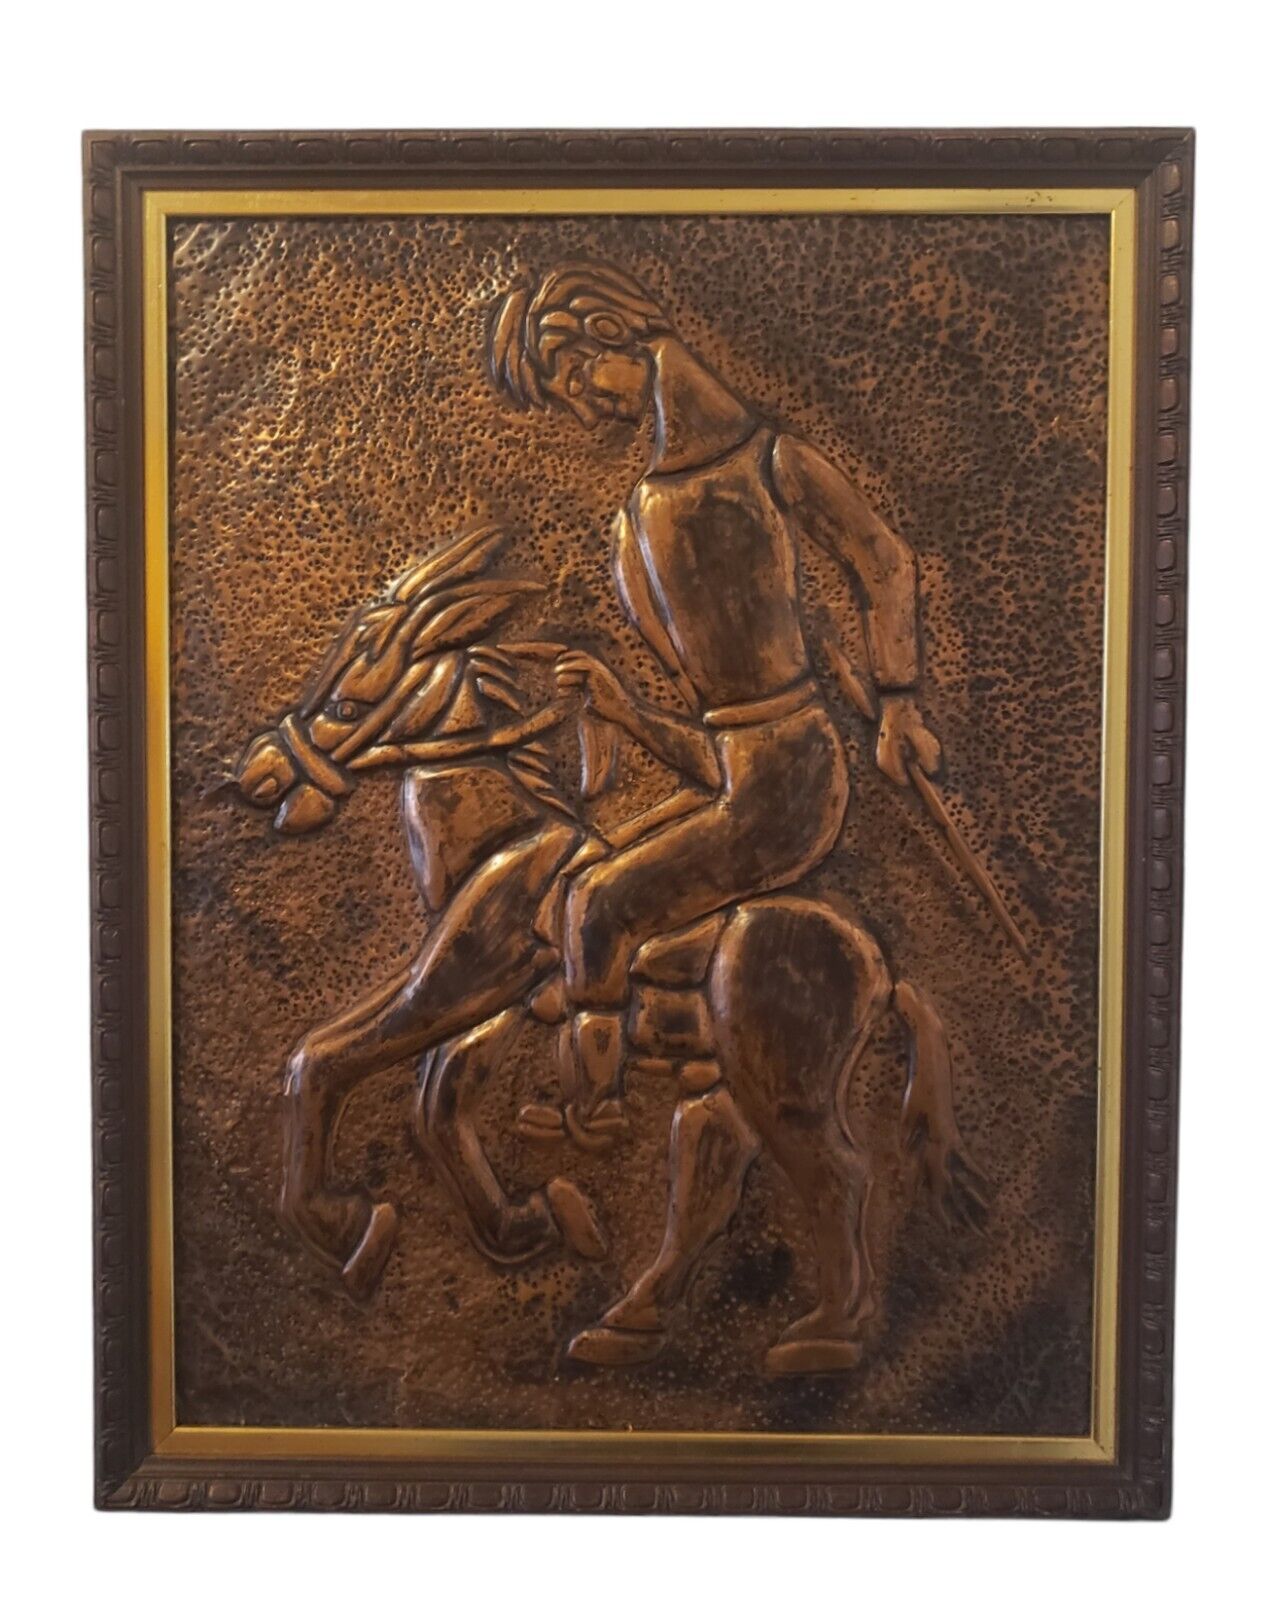 Vintage Embossed Relief Hammered Copper  Man Riding Horse  Wall Plaque Framed